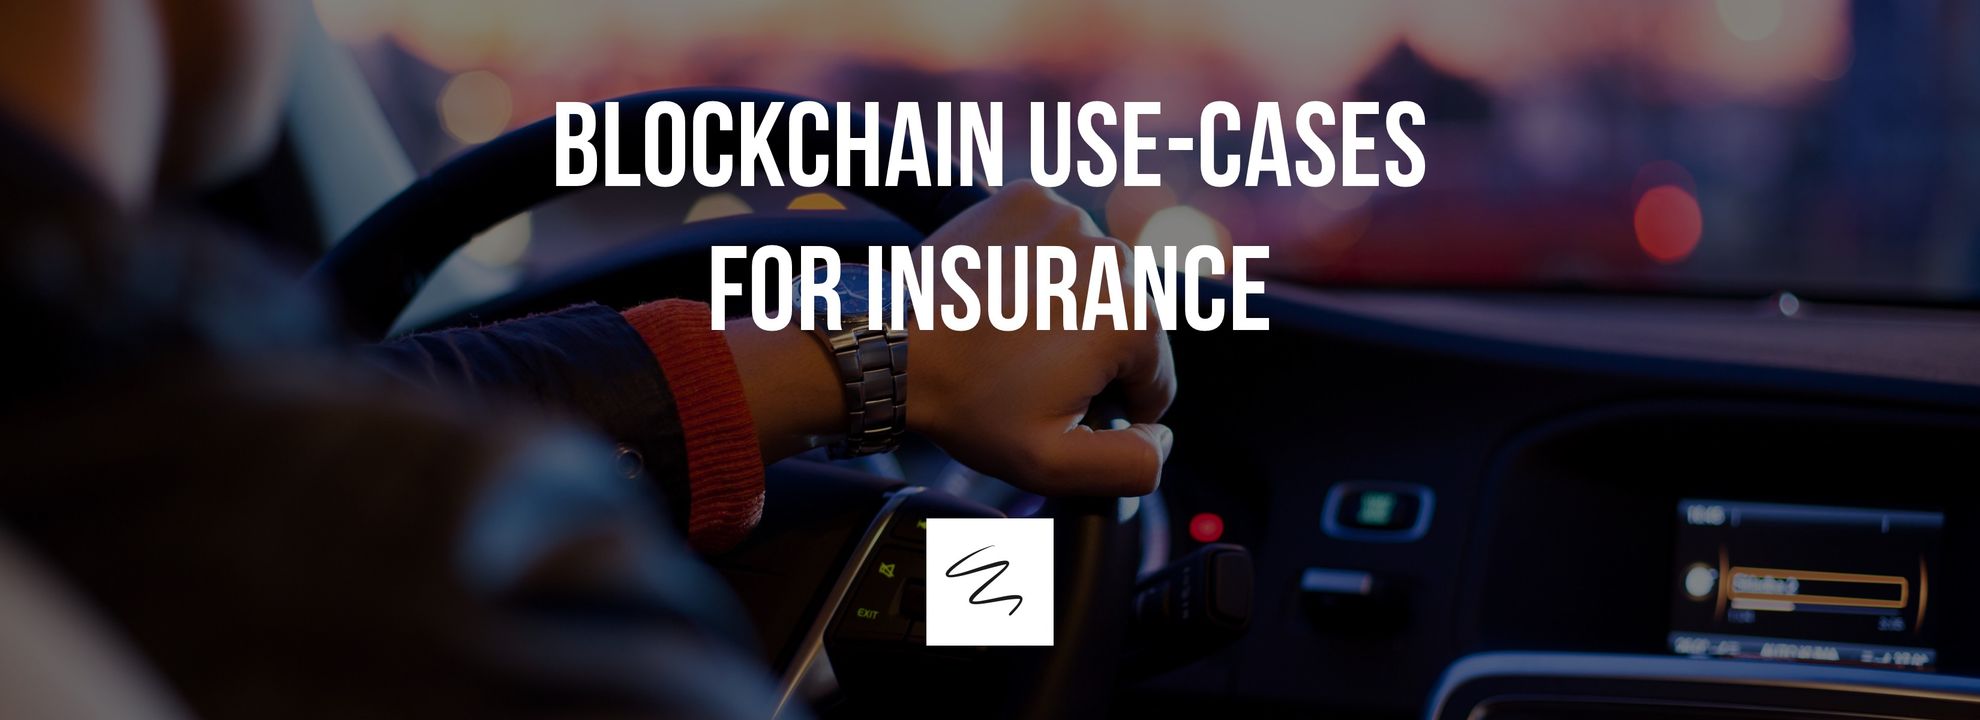 Blockchain use-cases for Insurance Industry in 2018